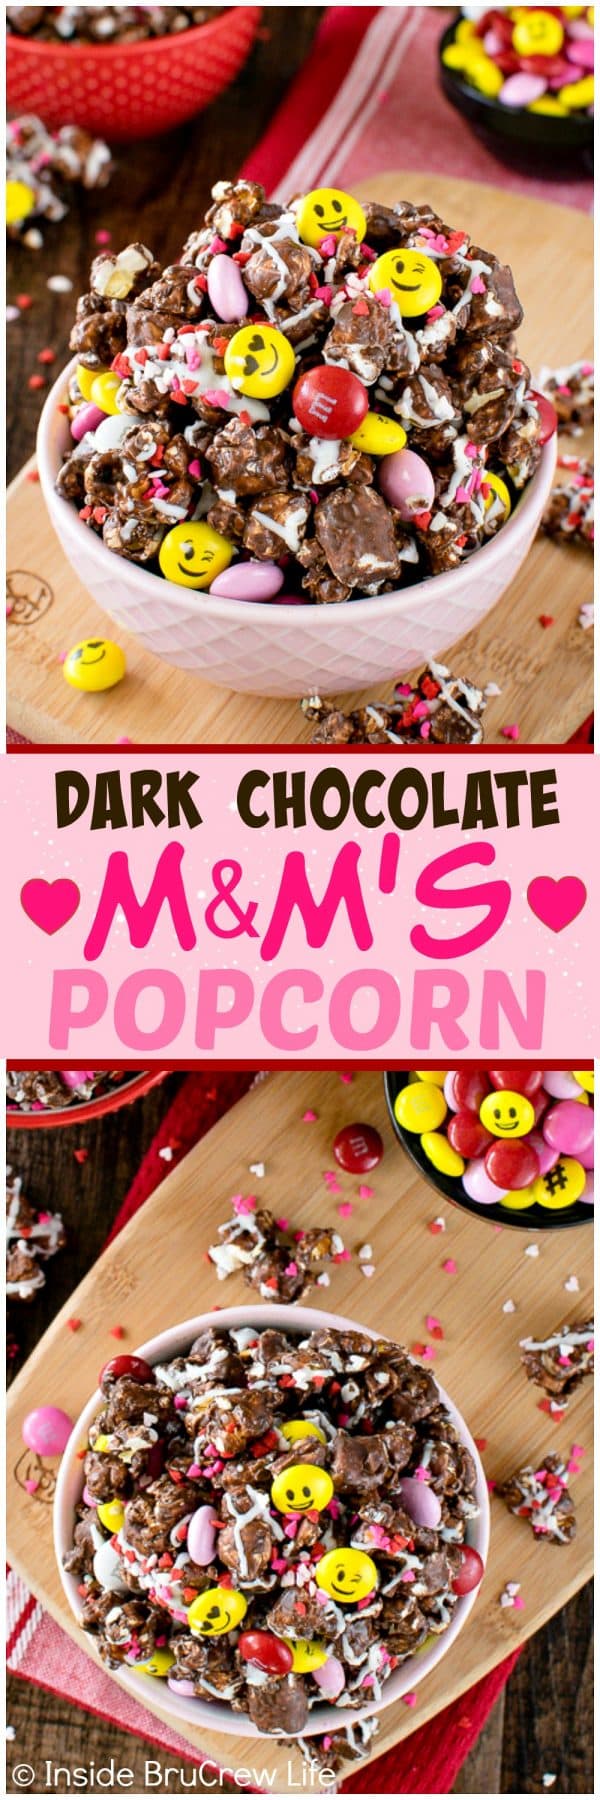 Dark Chocolate M&M's Popcorn - chocolate coated popcorn loaded with sprinkles & candies make this the best snack mix. Easy recipe for movie nights or game days!